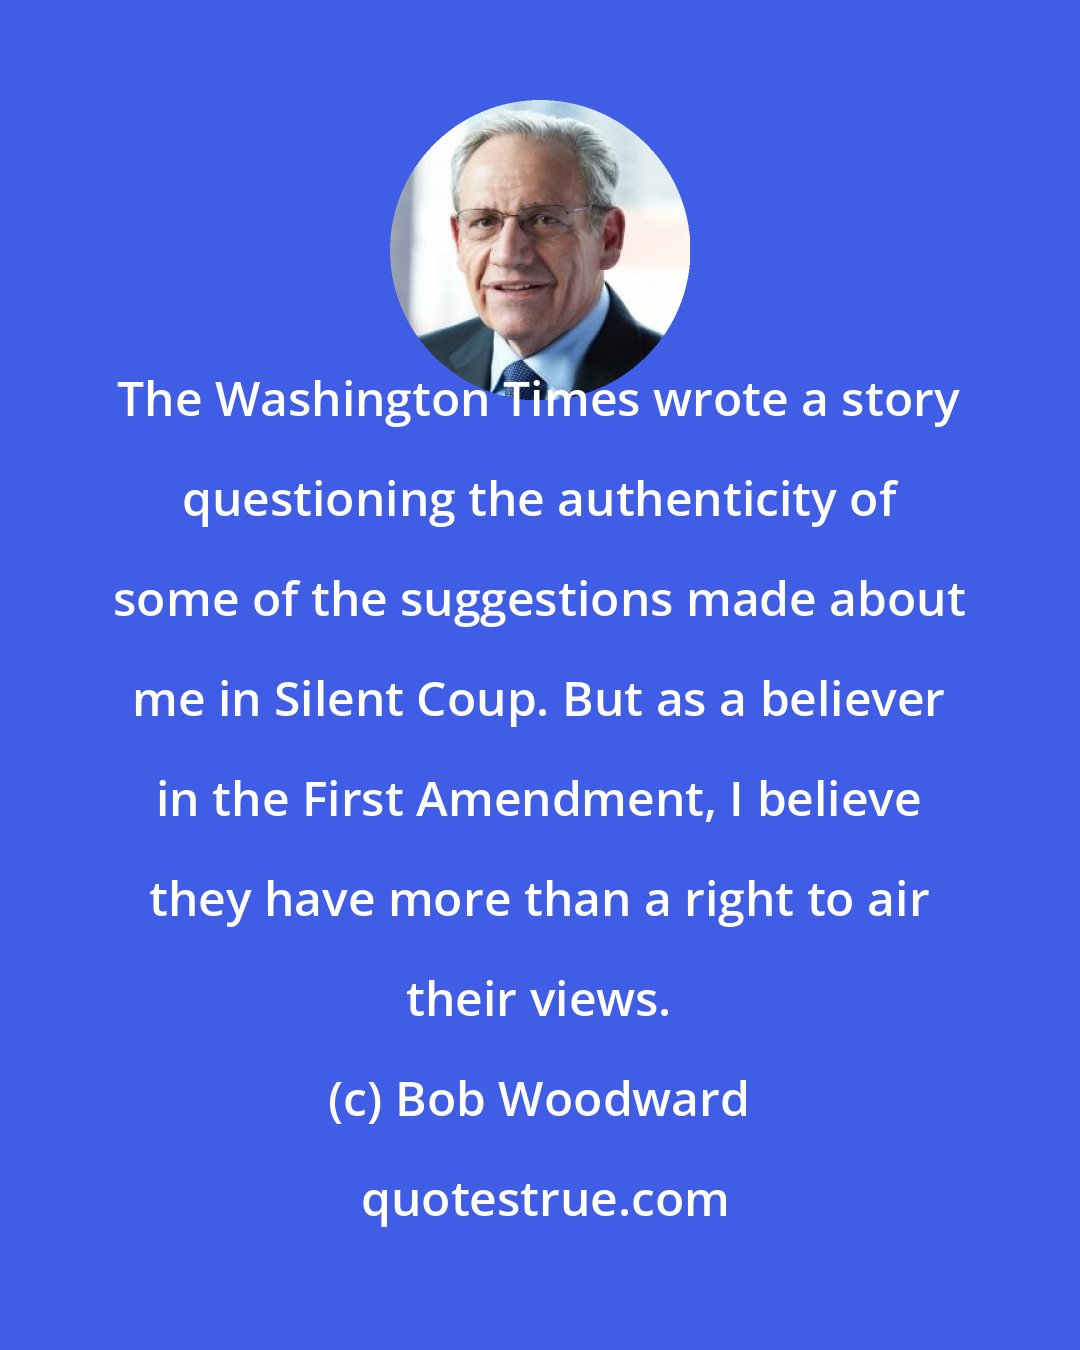 Bob Woodward: The Washington Times wrote a story questioning the authenticity of some of the suggestions made about me in Silent Coup. But as a believer in the First Amendment, I believe they have more than a right to air their views.